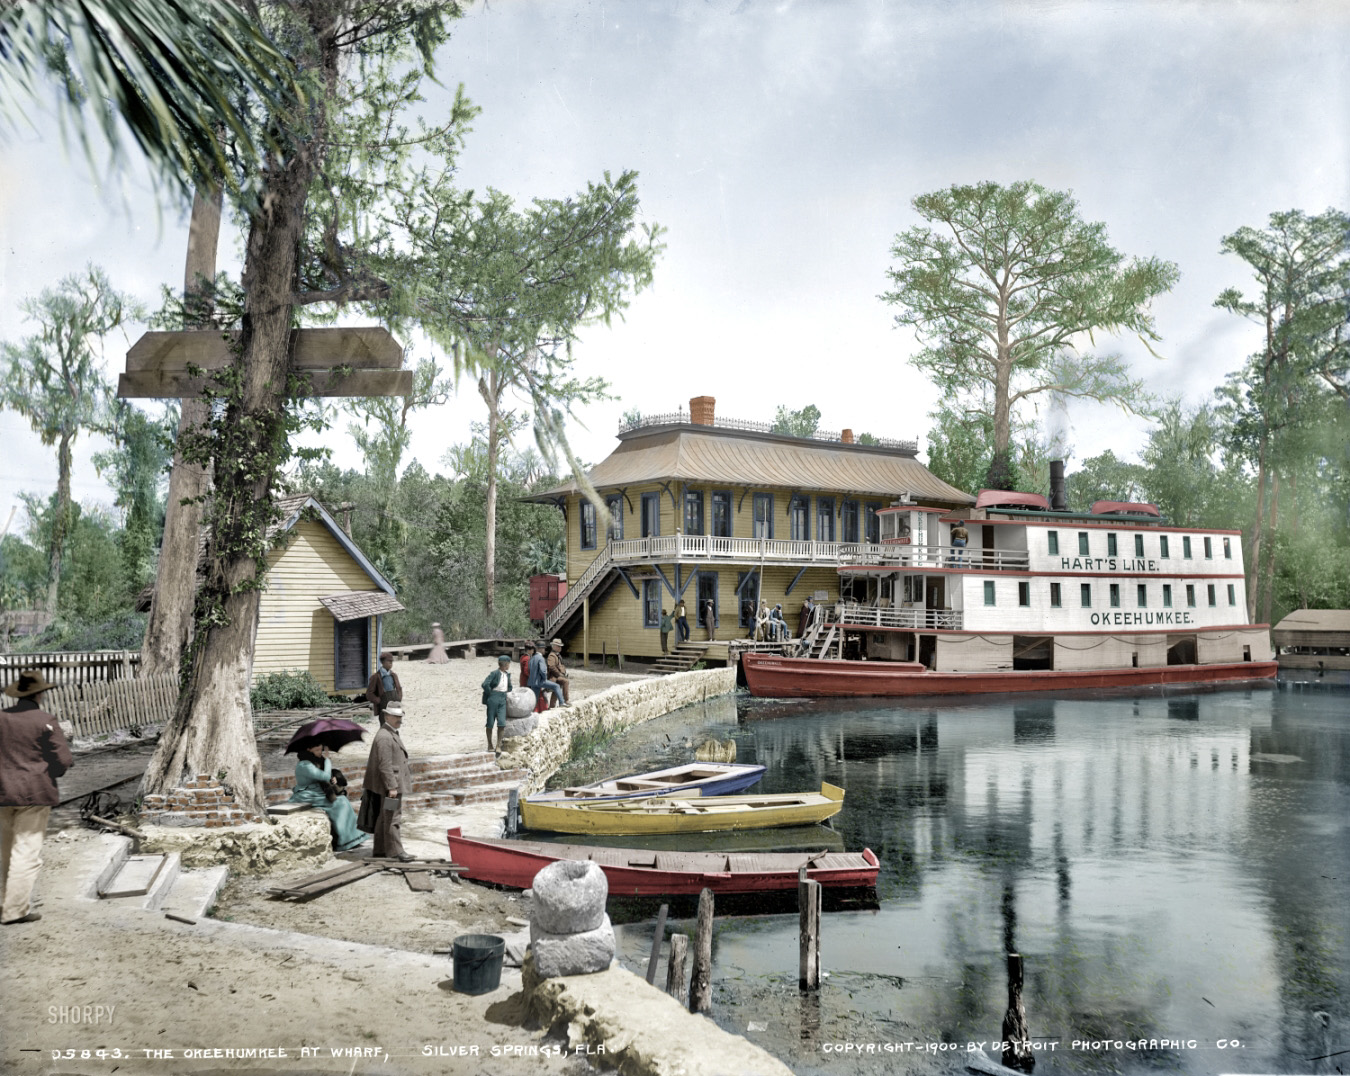 Silver Springs, Florida, circa 1900 (Colorized).  "Okeehumkee at wharf on the Oklawaha River." Detroit Publishing Company glass negative. View full size